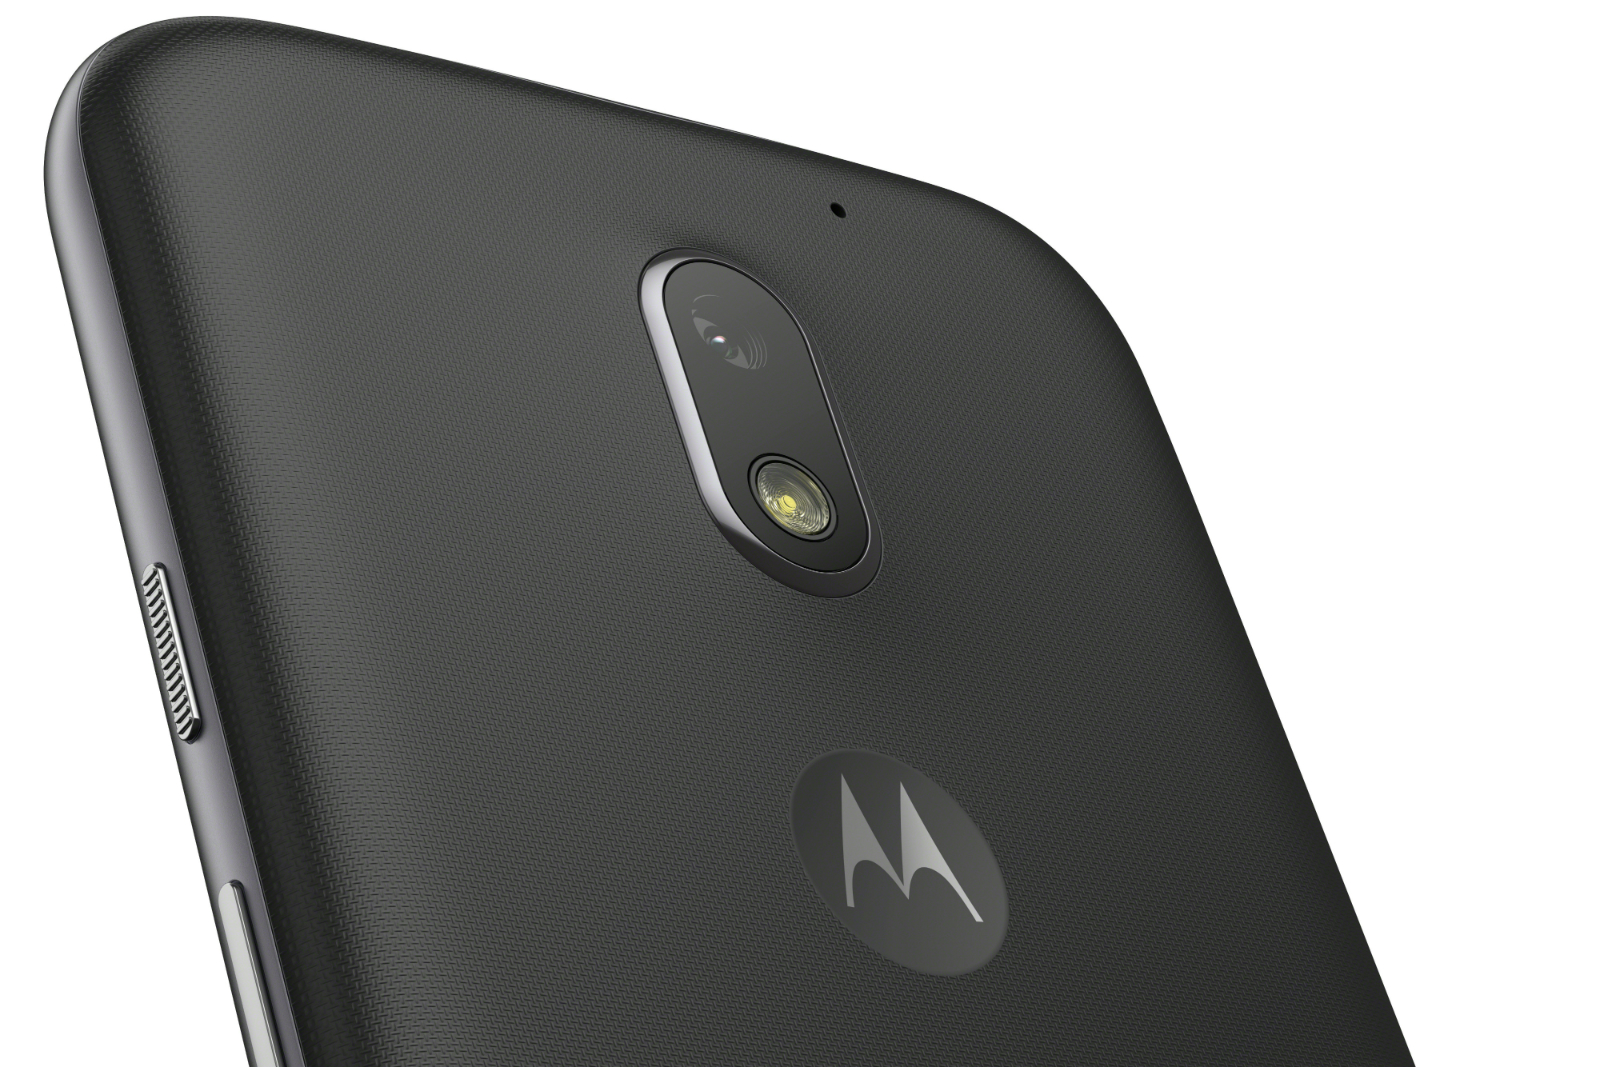 Controverse Fantastisch Belachelijk The new Moto E is bigger and better, but just as affordable | Engadget